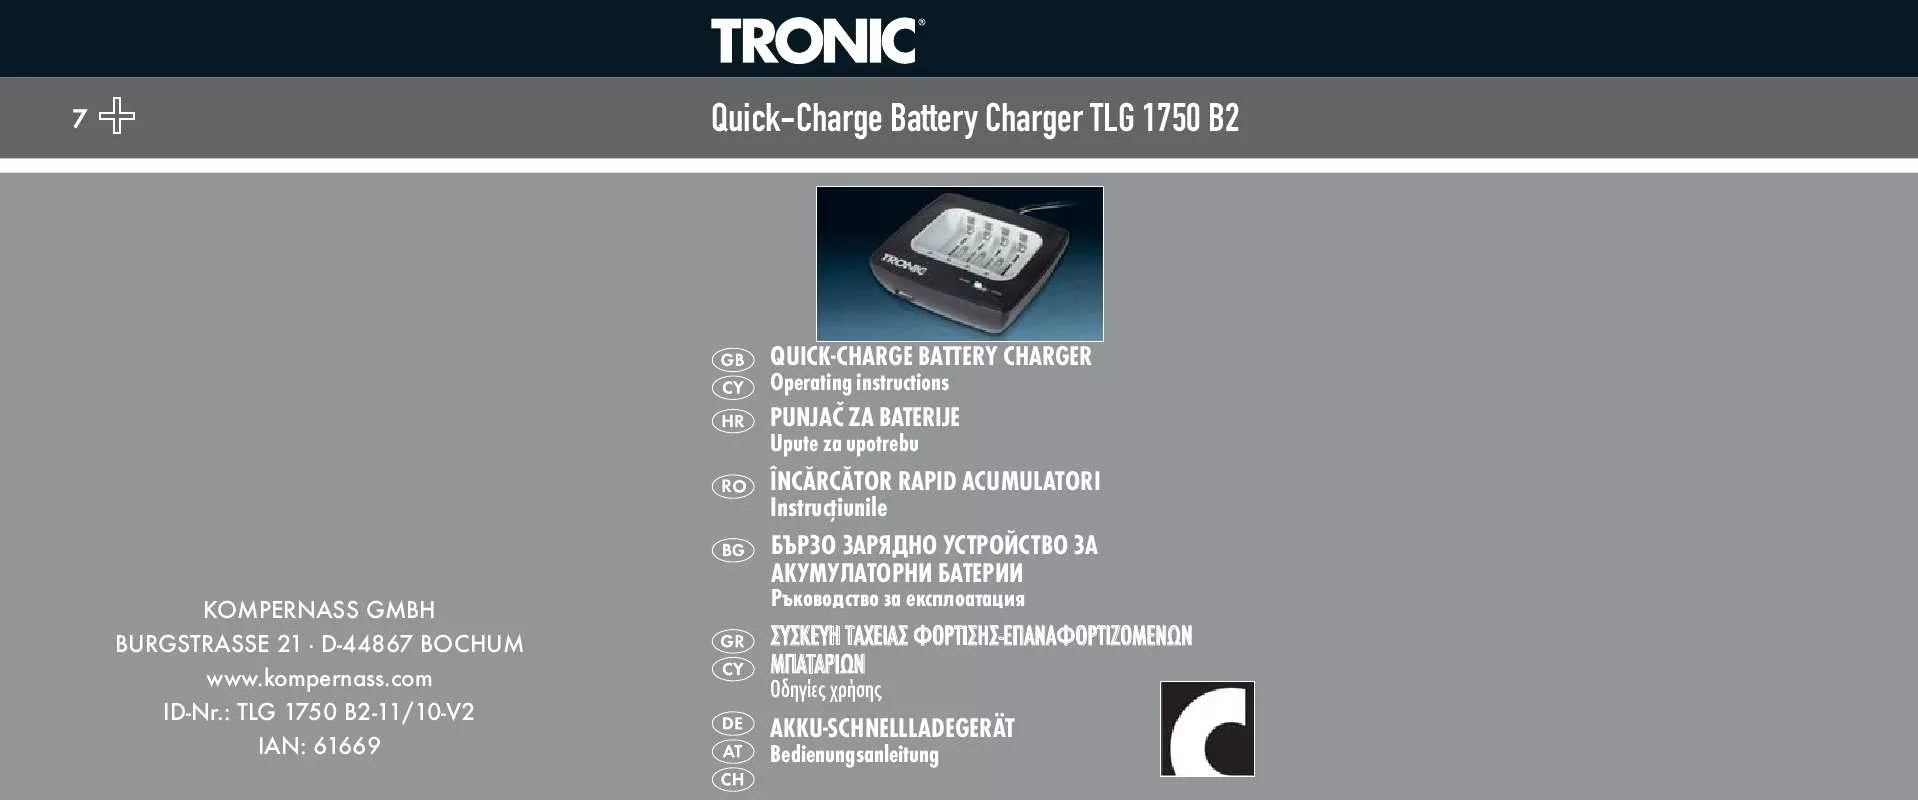 Mode d'emploi TRONIC TLG 1750 B2 QUICK-CHARGE BATTERY CHARGER